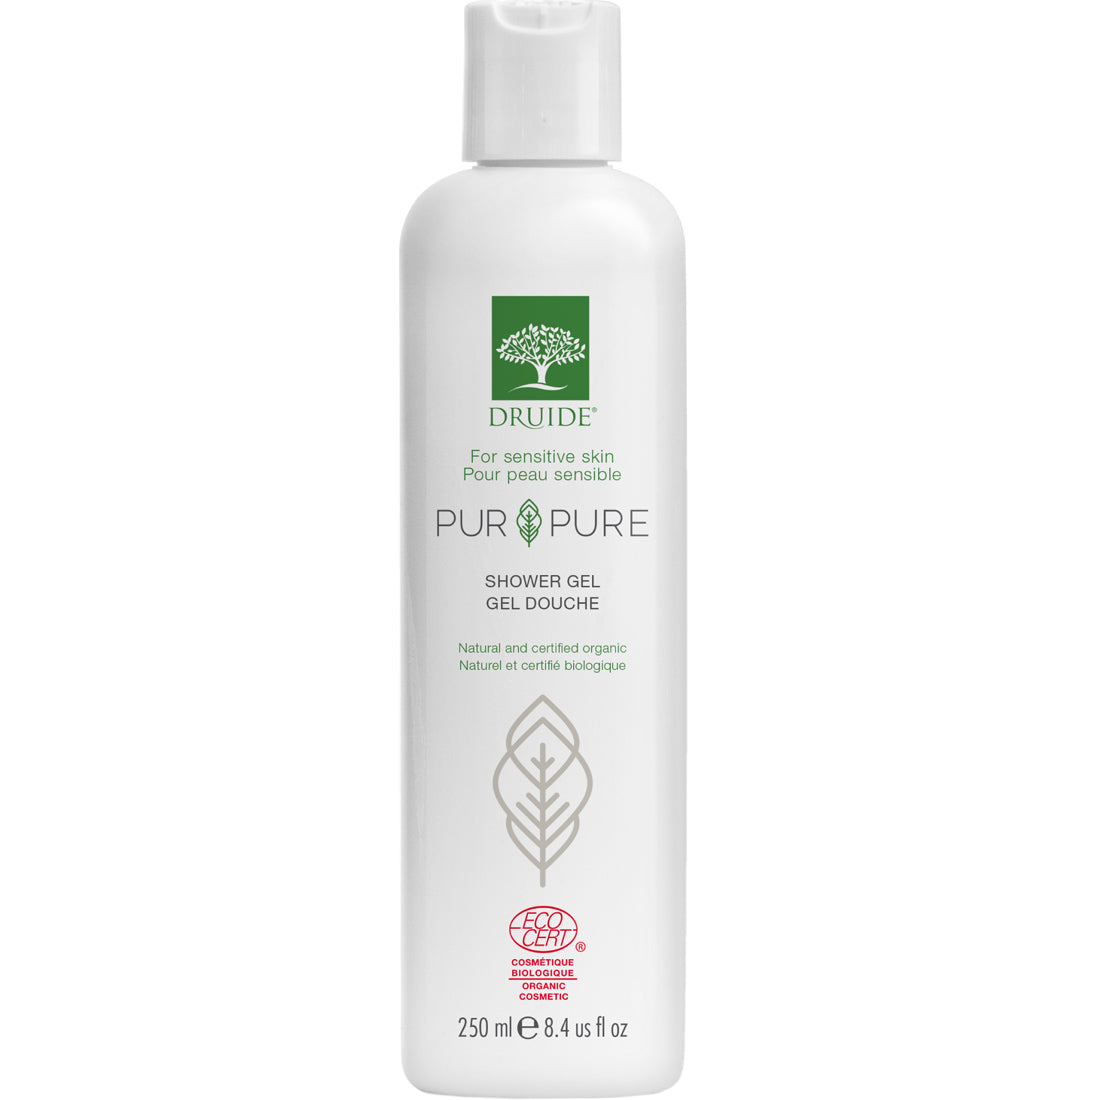 Druide Pur and Pure Shower Gel, 250ml